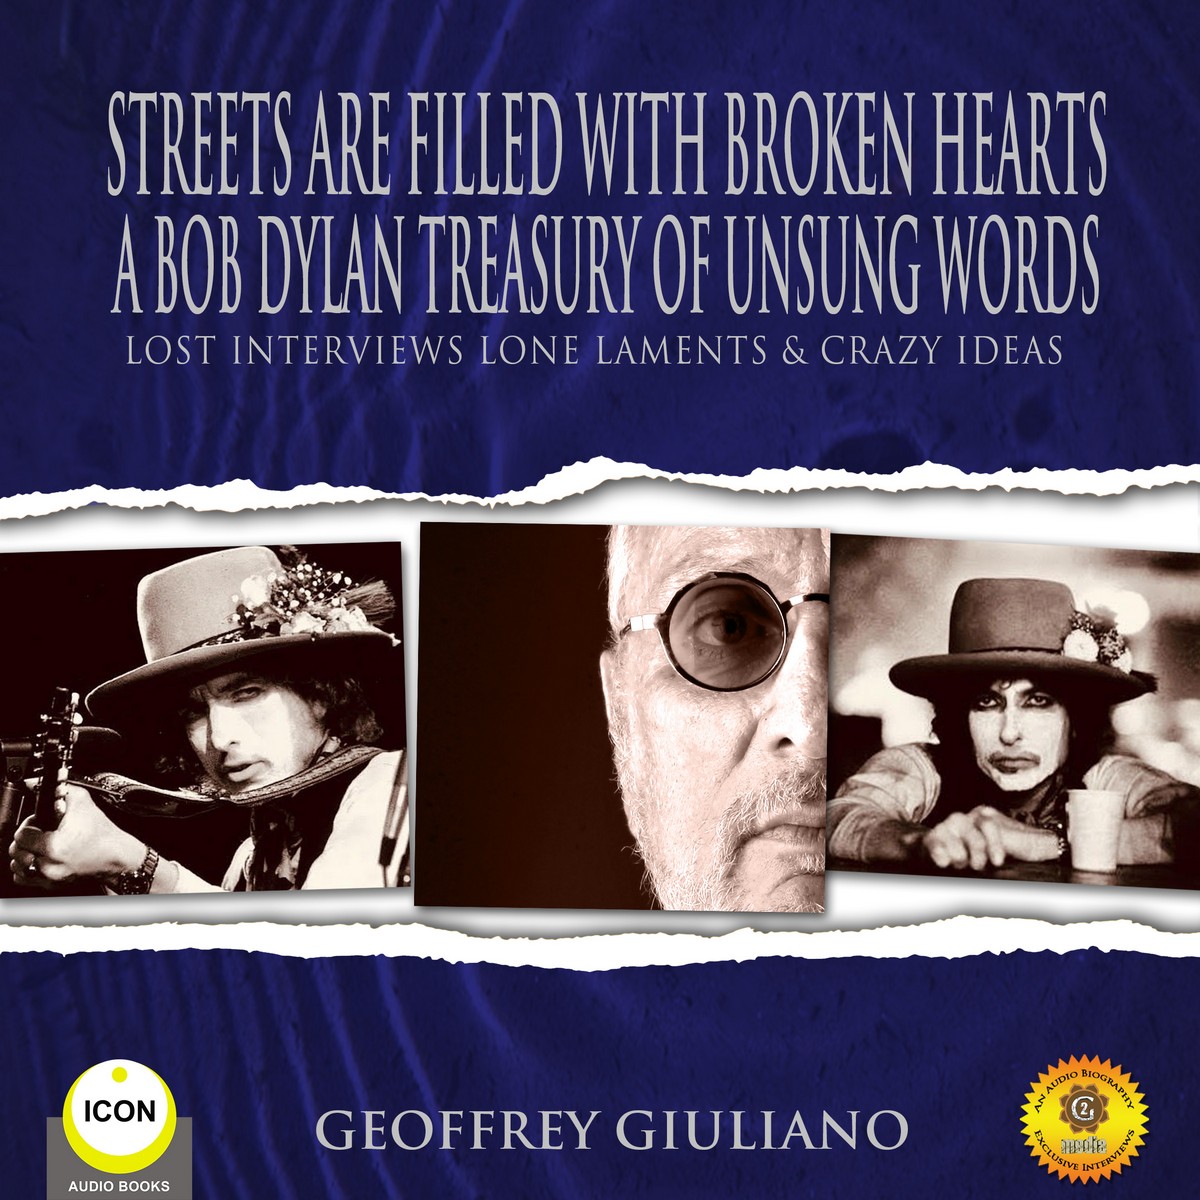 Street Are Filled With Broken Hearts – A Bob Dylan Treasury Of Unsung Words – Lost Interviews Lone Laments & Crazy Ideas